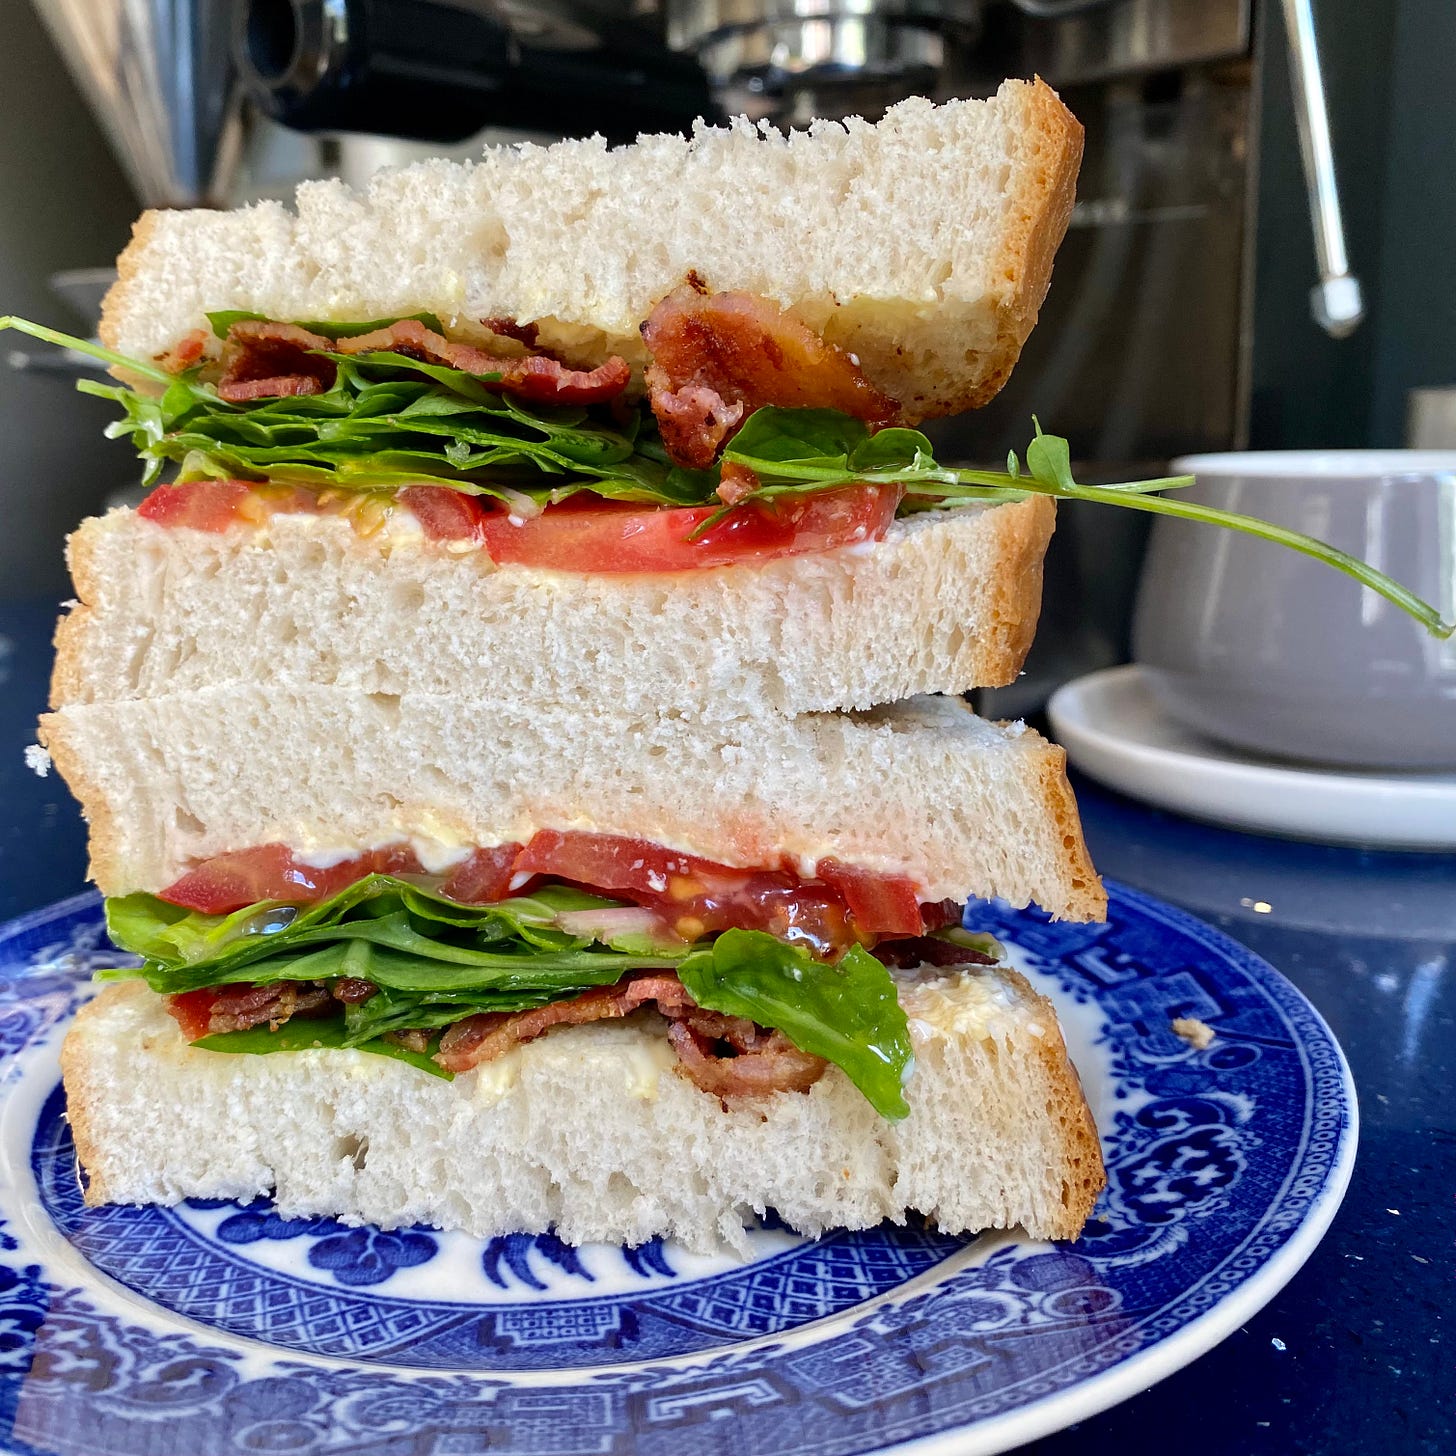 Cross-section of a sandwich: white bread filled with sliced tomato, bacon and salad leaves. Sandwich is on a blue and white patterned plate. A grey coffee cup is behind and to the right.